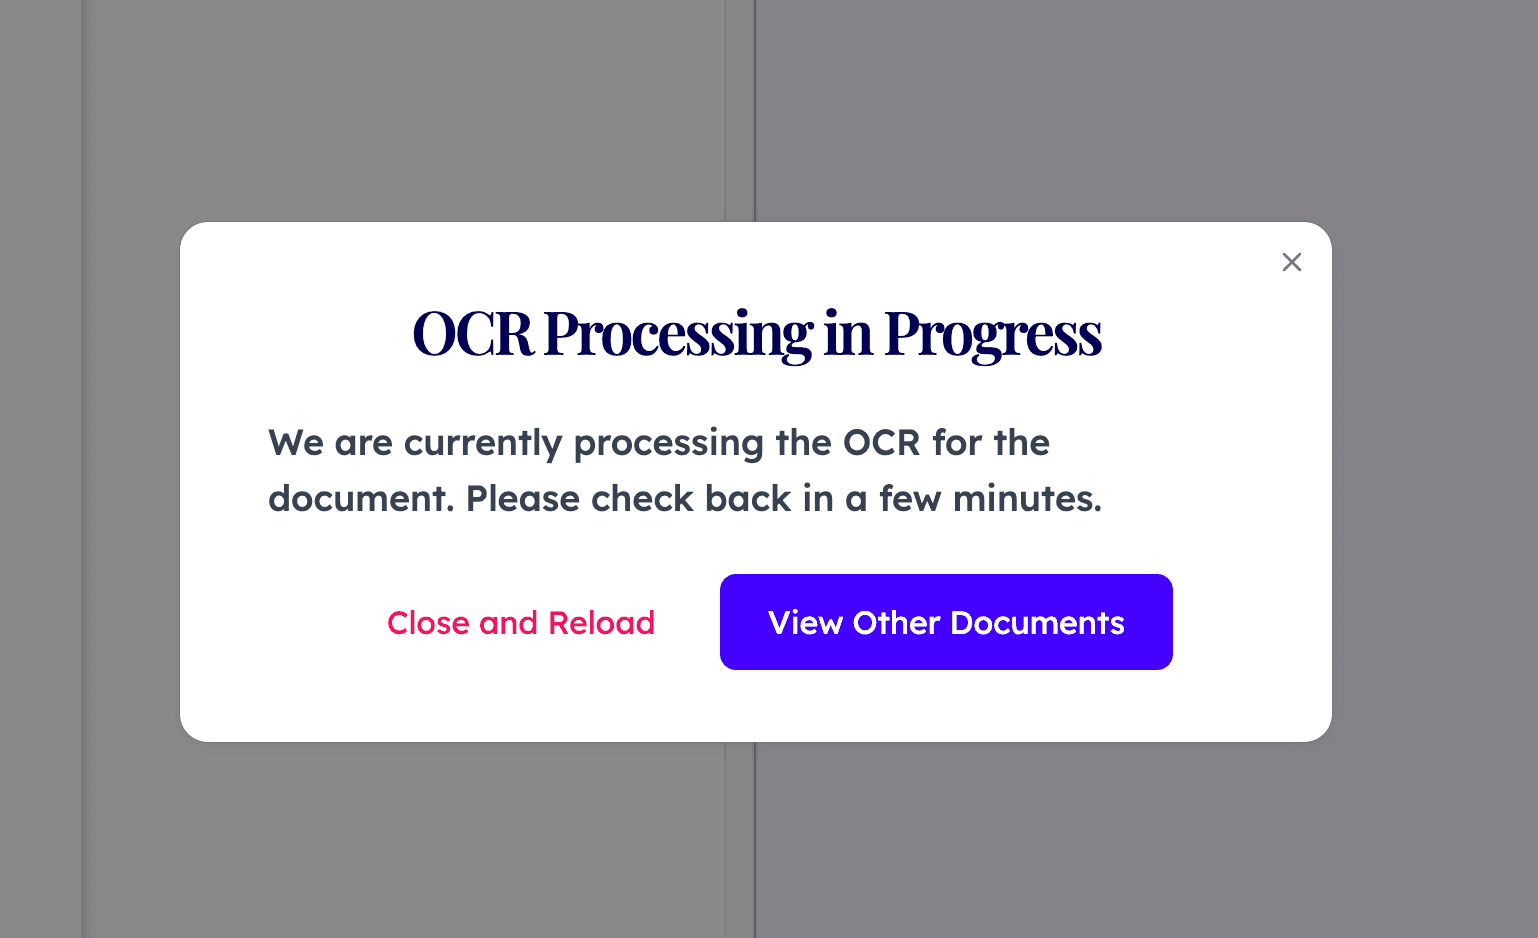 Support for Optical Character Recognition (OCR)